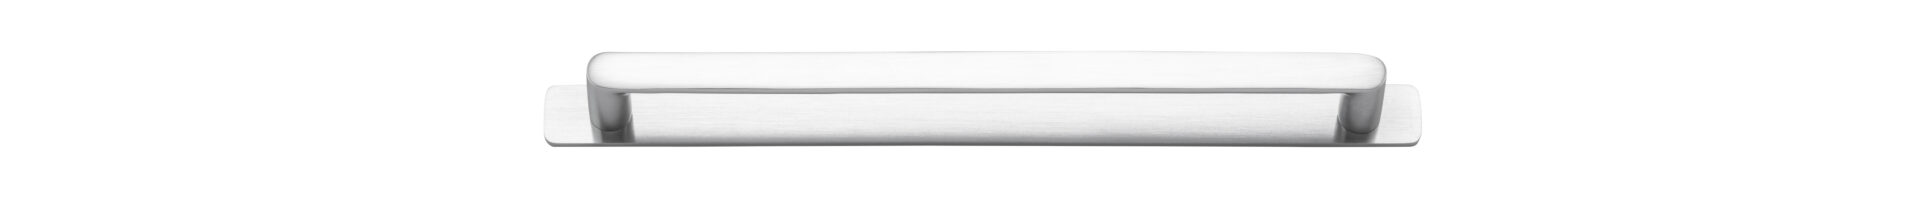 20975B - Osaka Cabinet Pull with Backplate - CTC256mm - Brushed Chrome